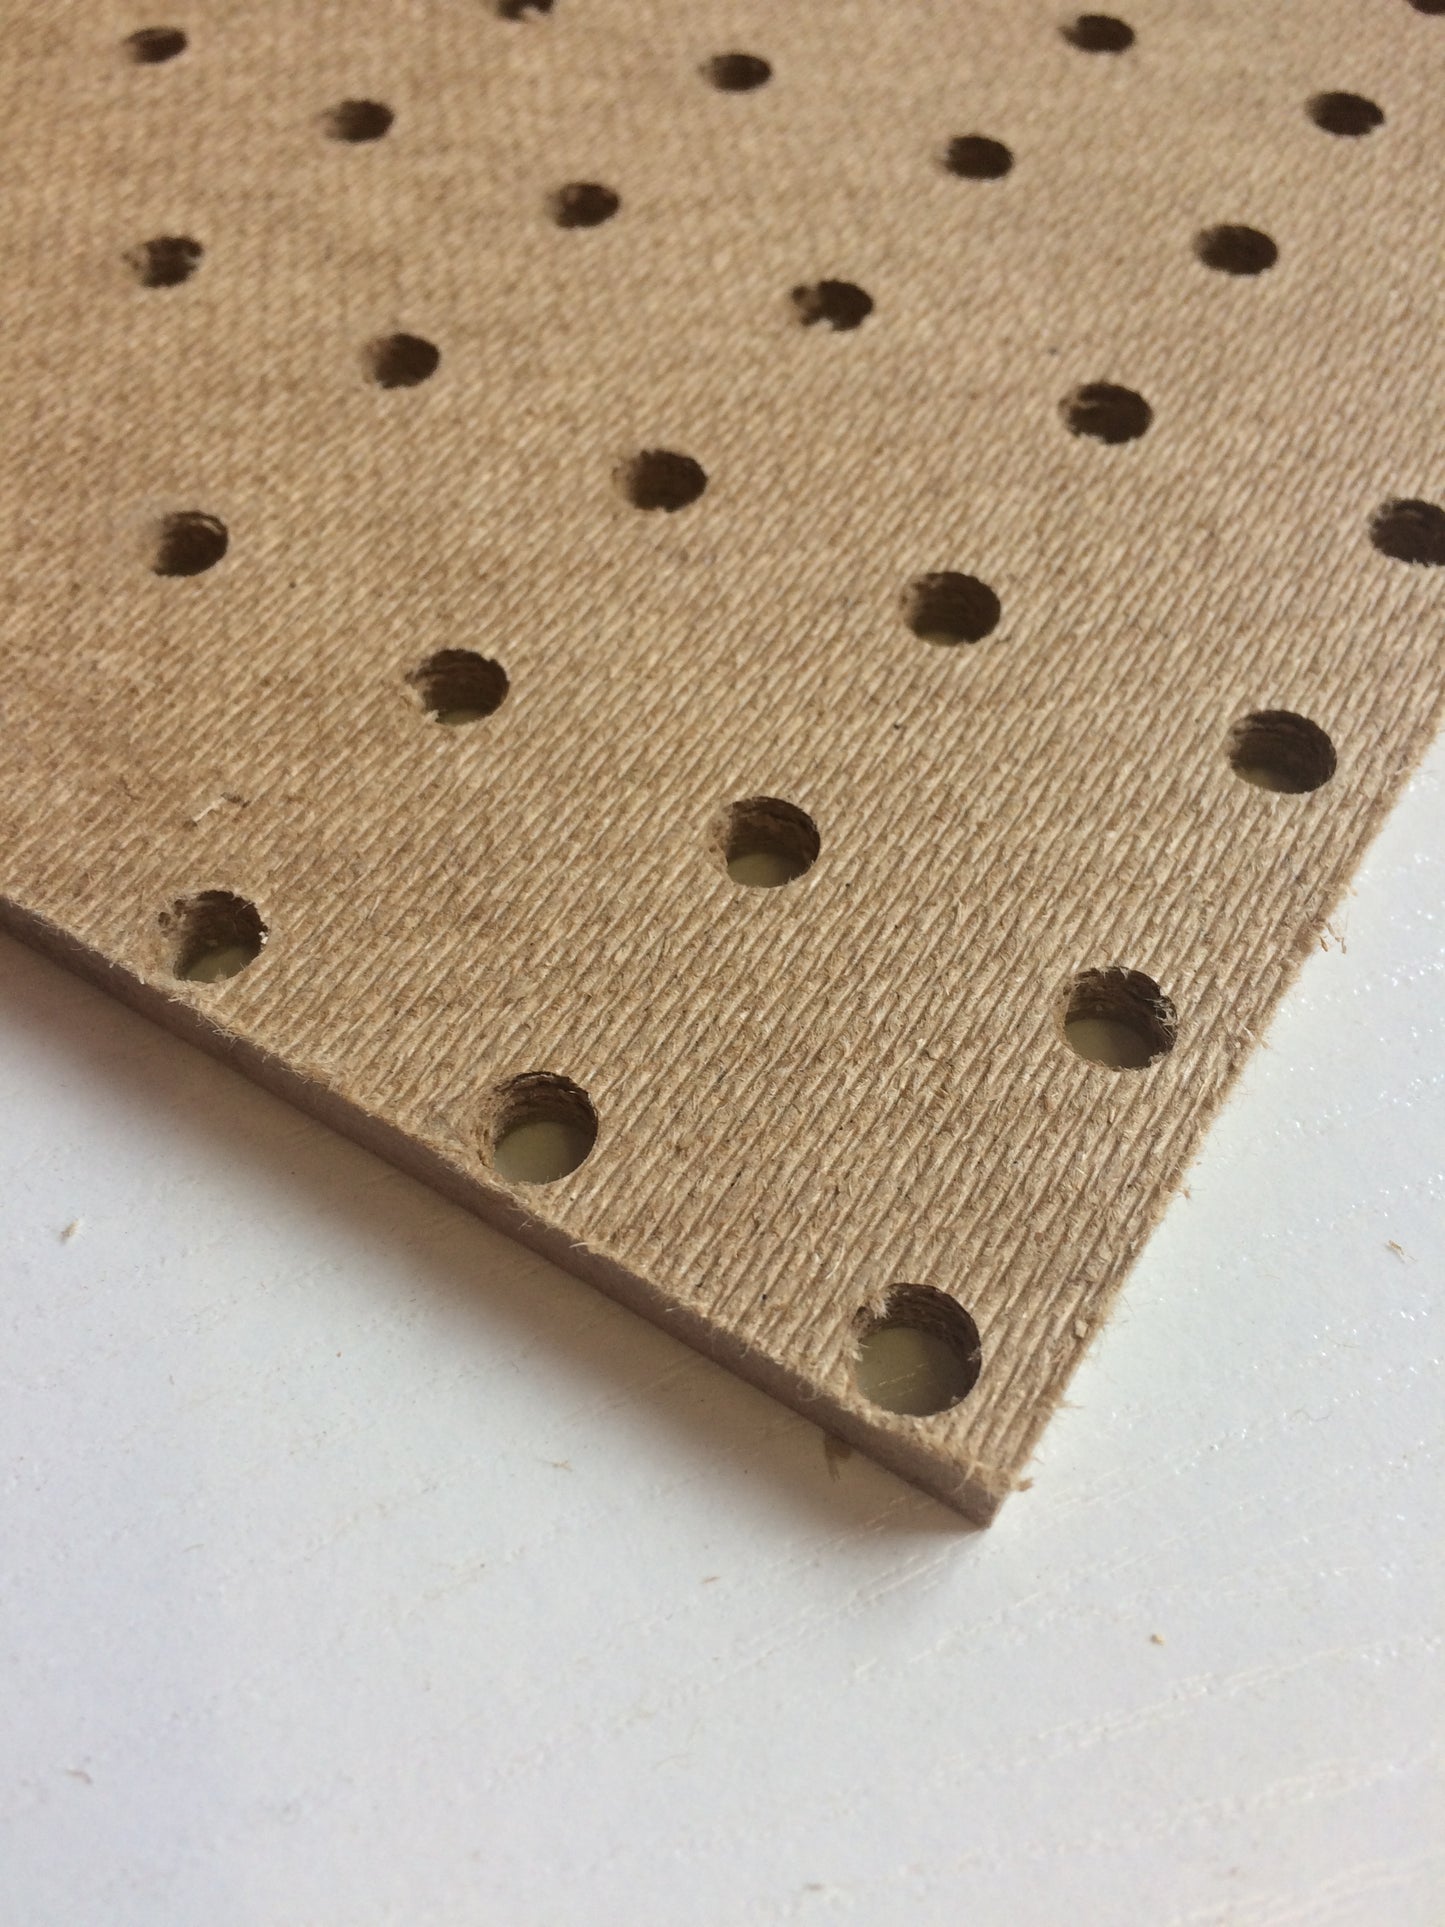 300 x 300mm 6mm pegboard , Small pegboard squares ideal compact storage